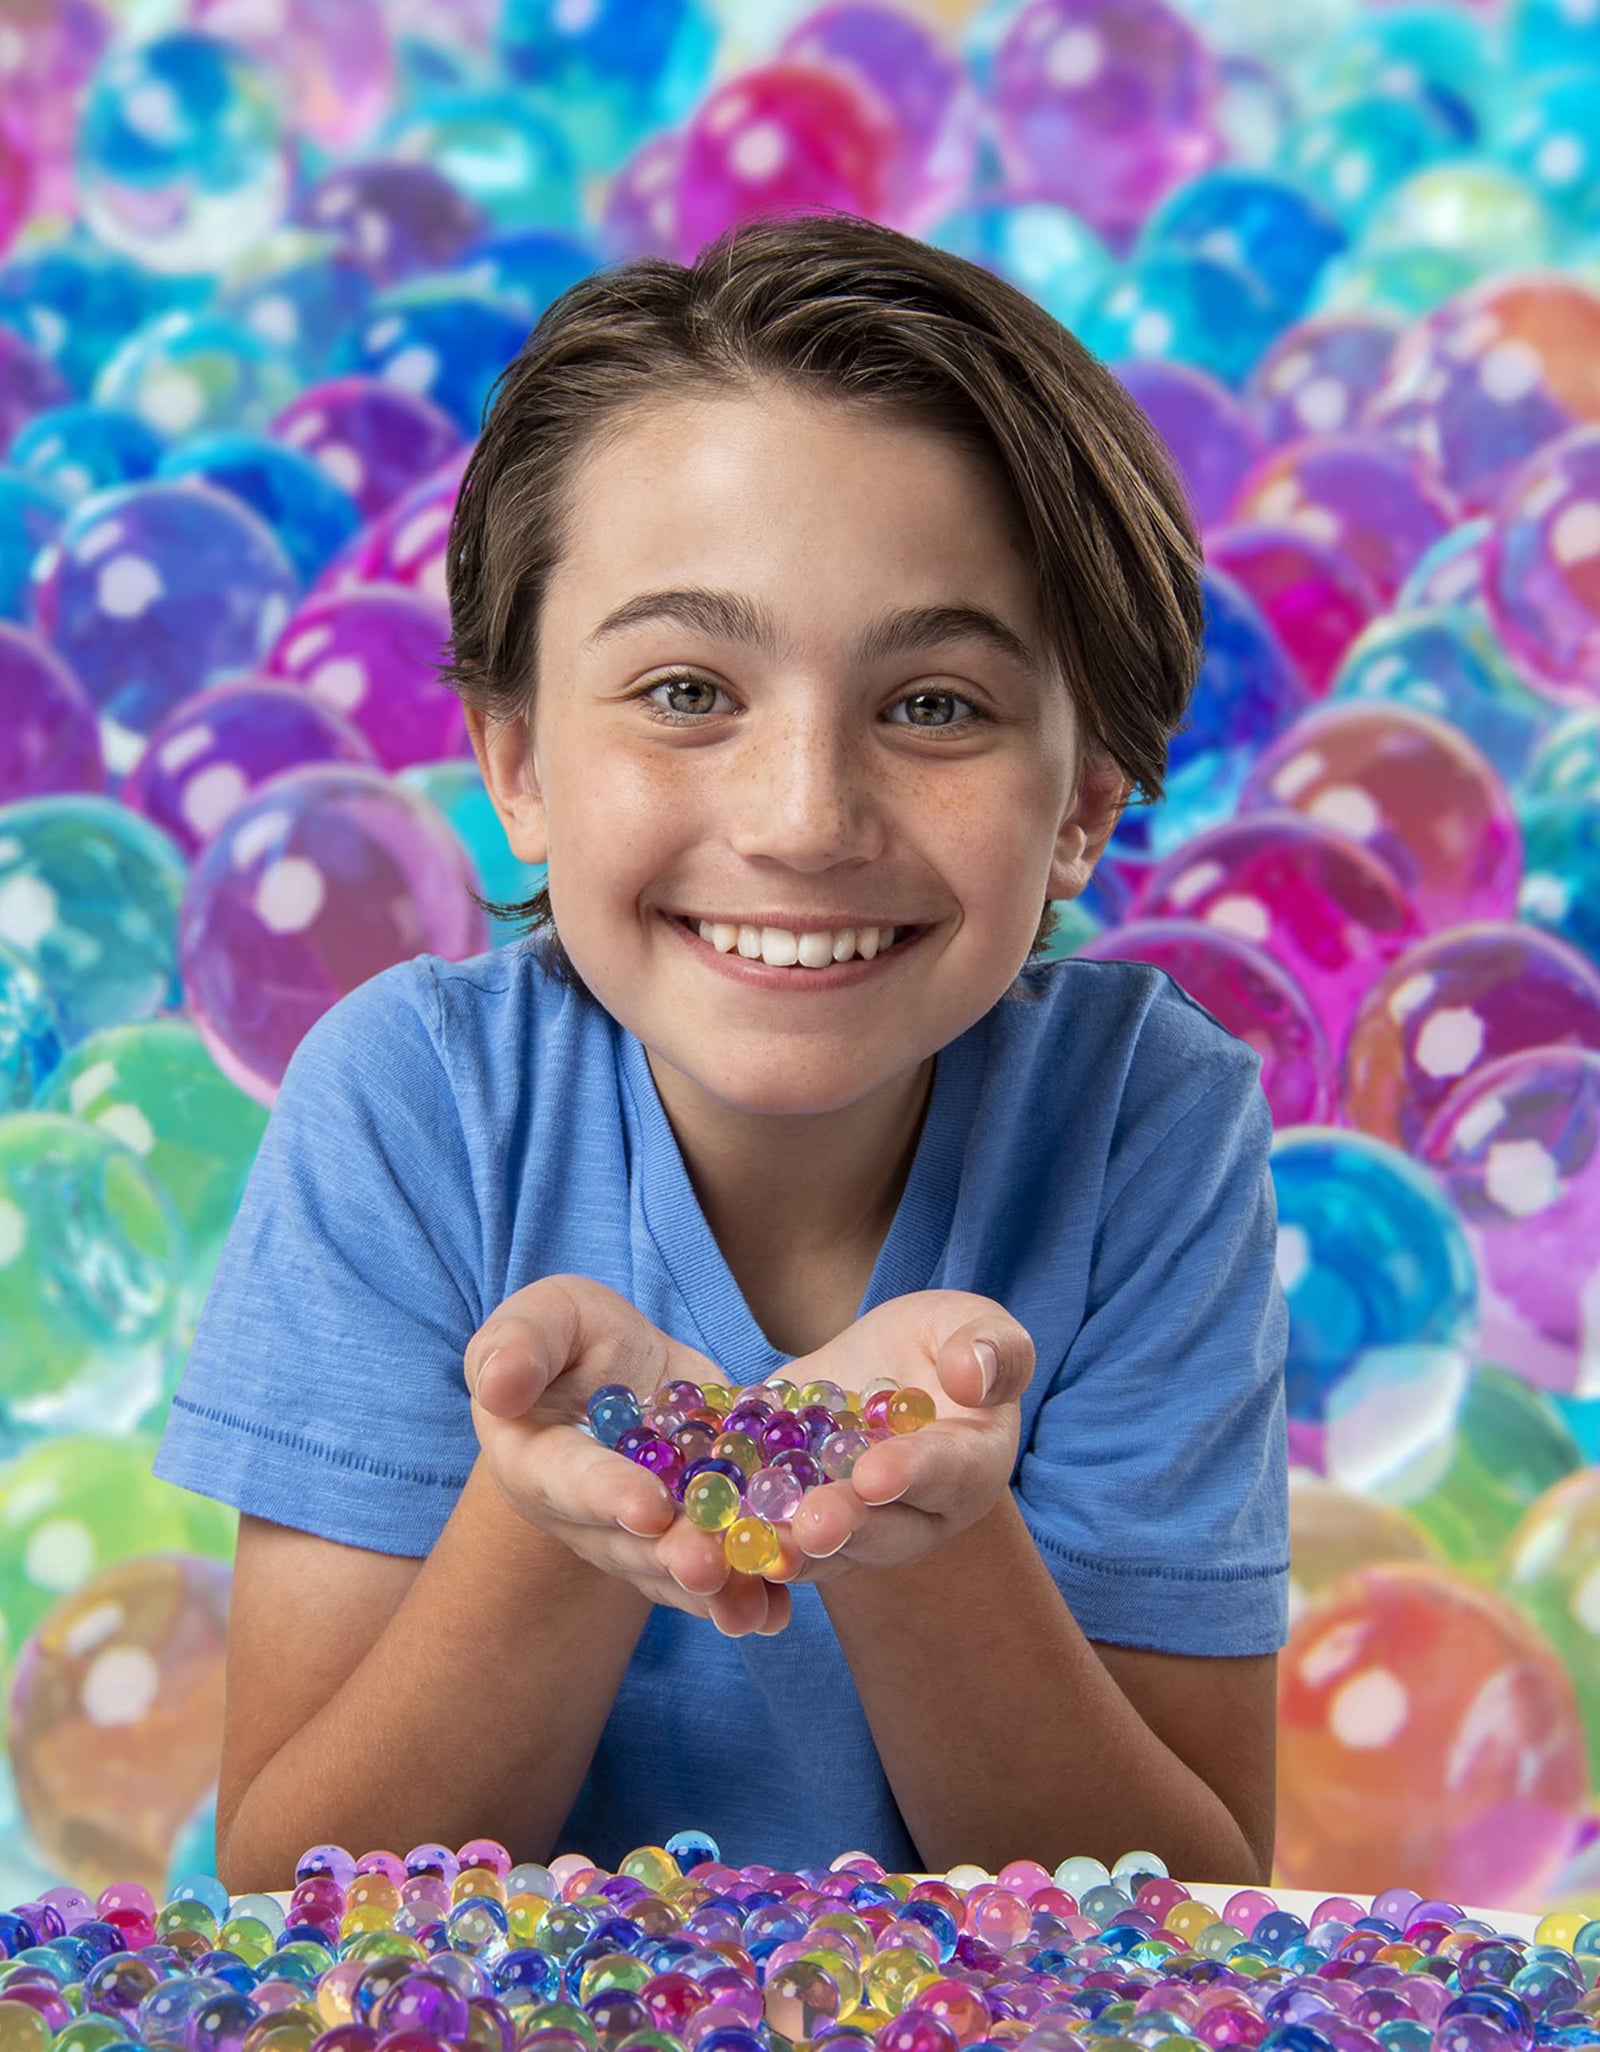 Orbeez, The One and Only, Multipack with 2,000, Non-Toxic Water Beads, Sensory Toys for Kids Aged 5 and up